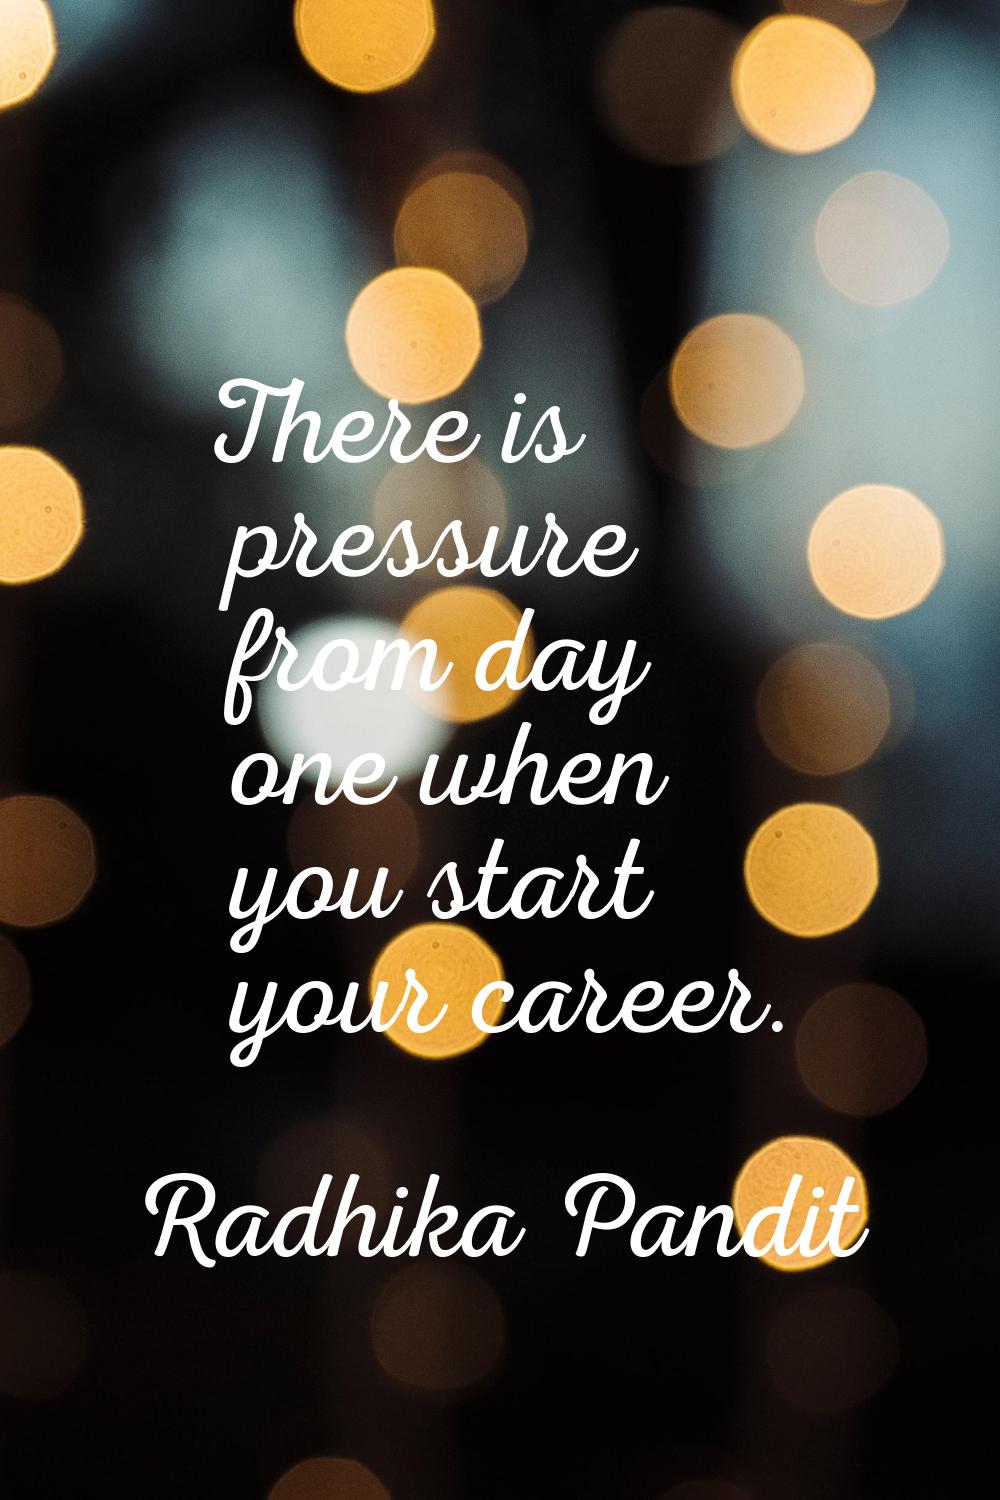 There is pressure from day one when you start your career.